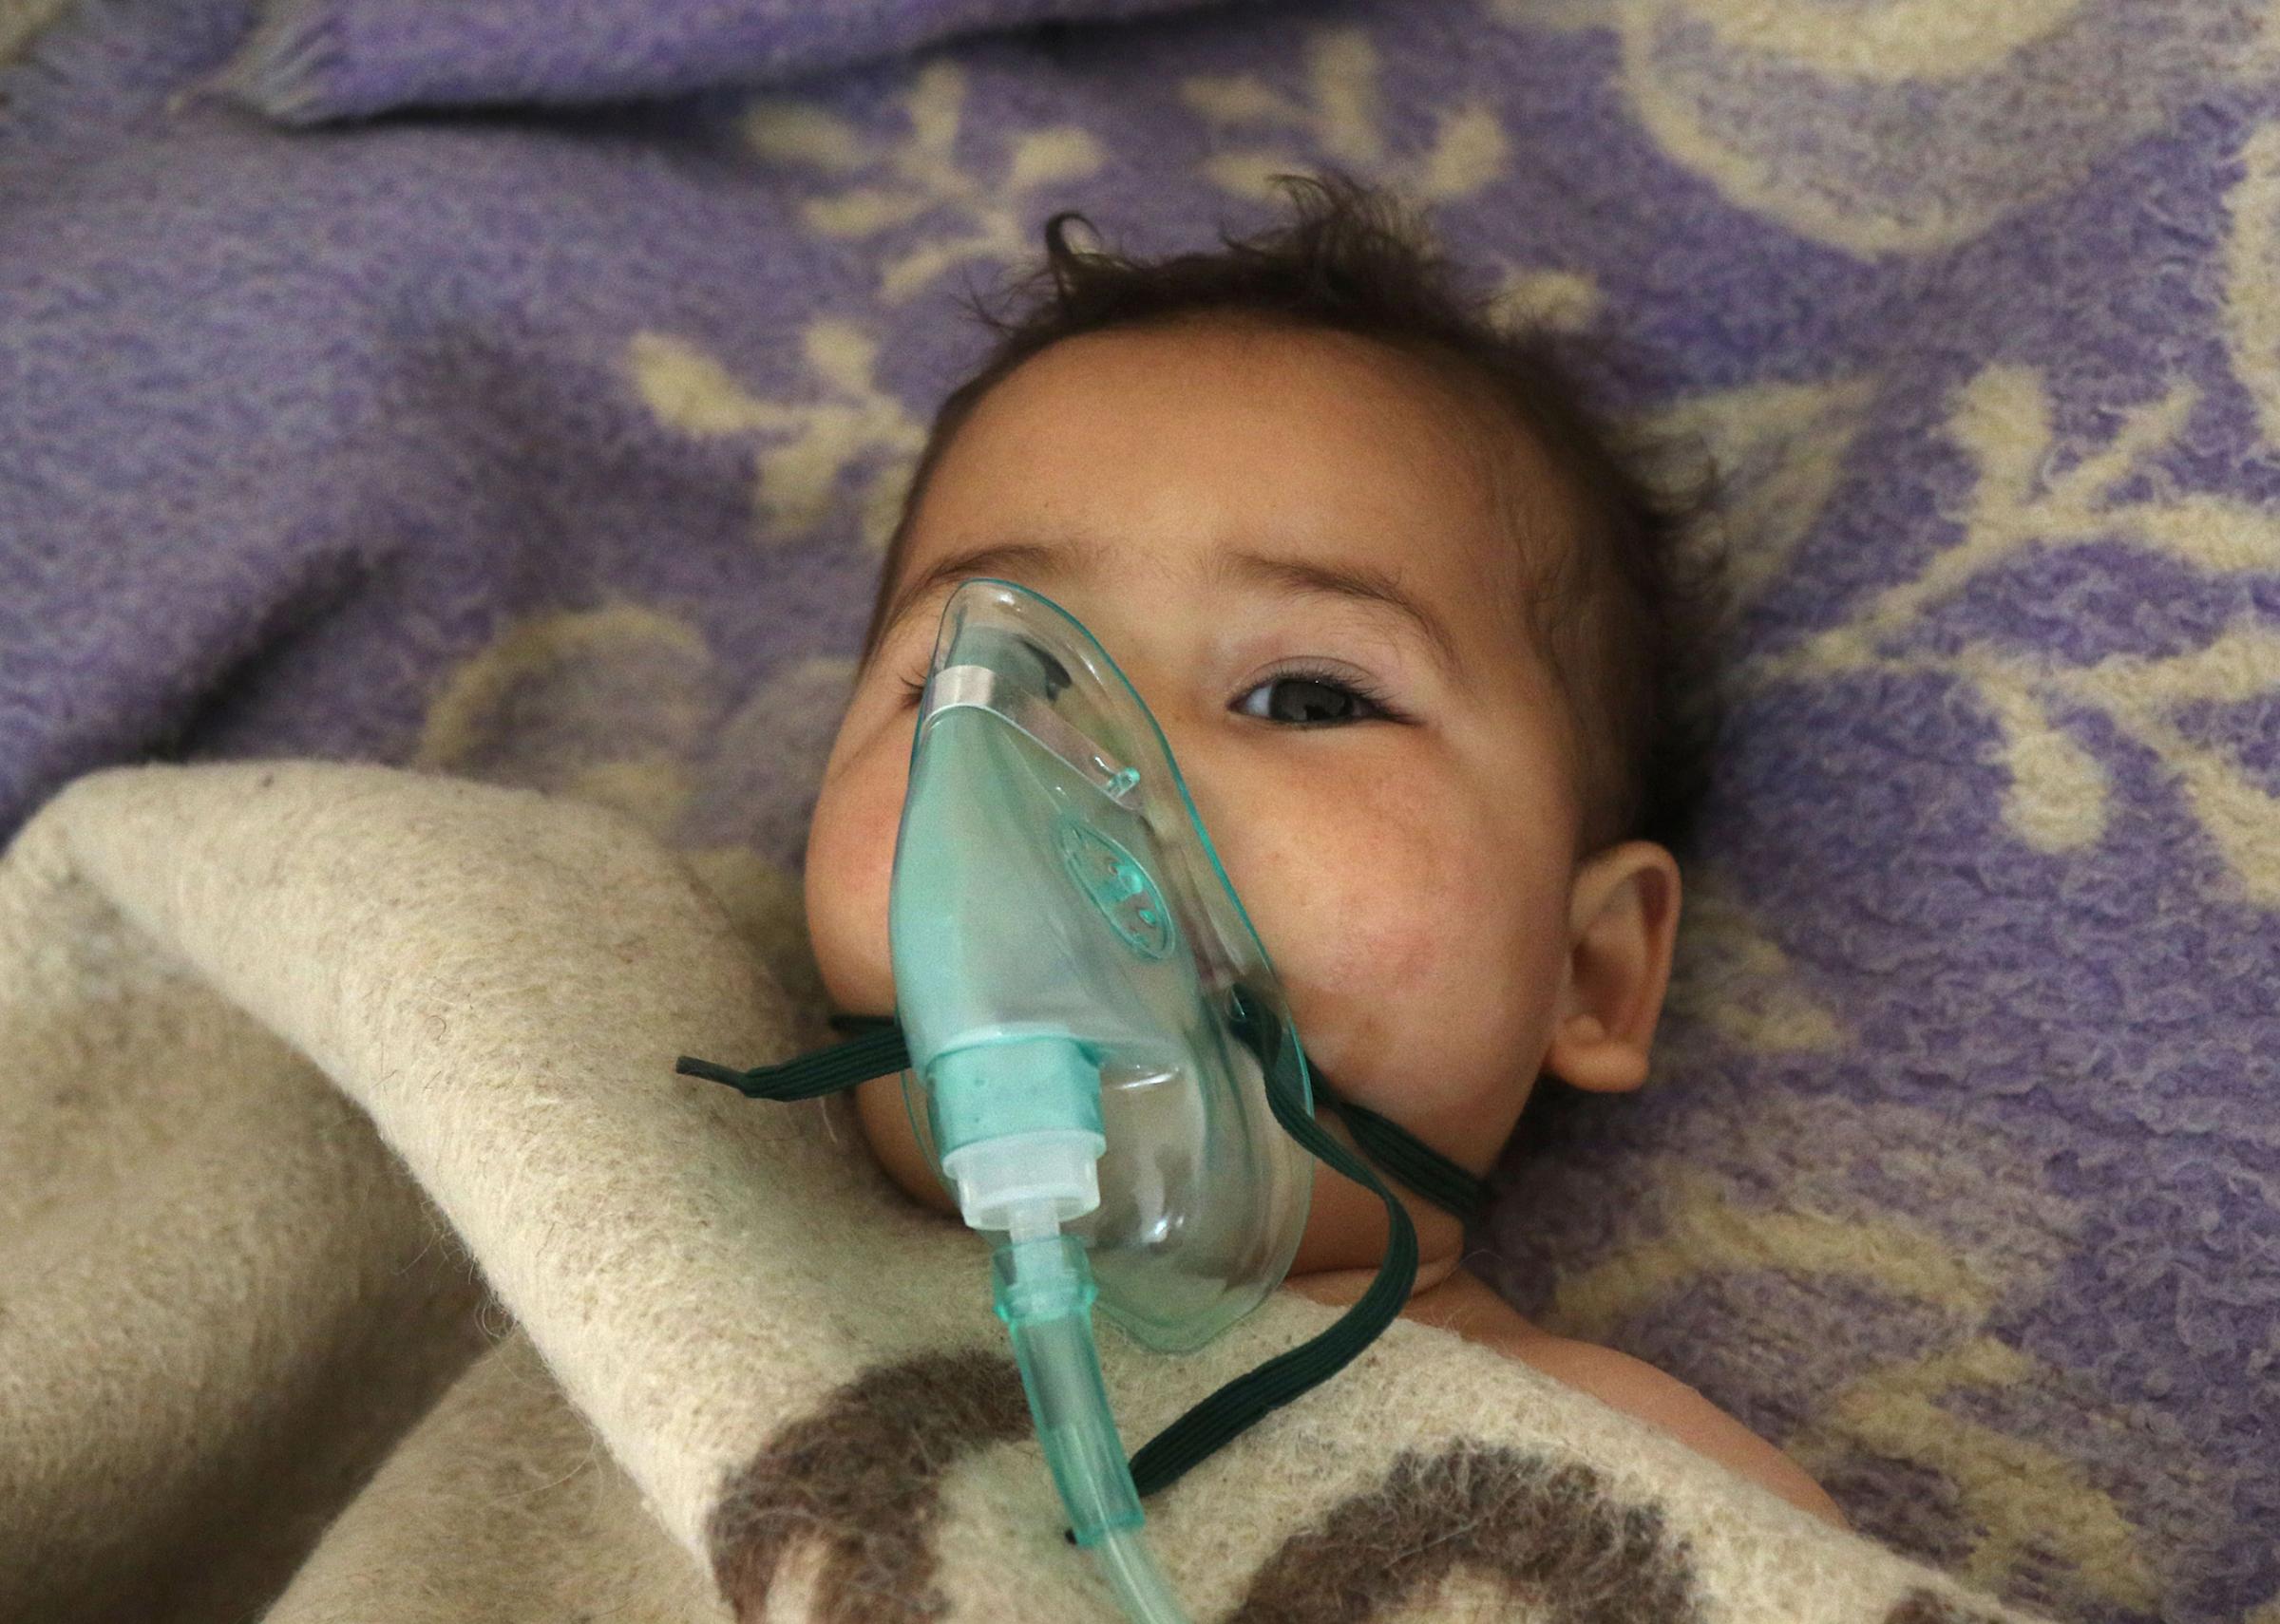 A Syrian child receives treatment after a suspected gas attack at a small hospital in Maaret al-Noman, a rebel-held town in Idlib province, on April 4, 2017. The Syrian Observatory for Human Rights said those killed in the town of Khan Sheikhun, in Idlib province, had died from the effects of the gas, adding that dozens more suffered respiratory problems and other symptoms.